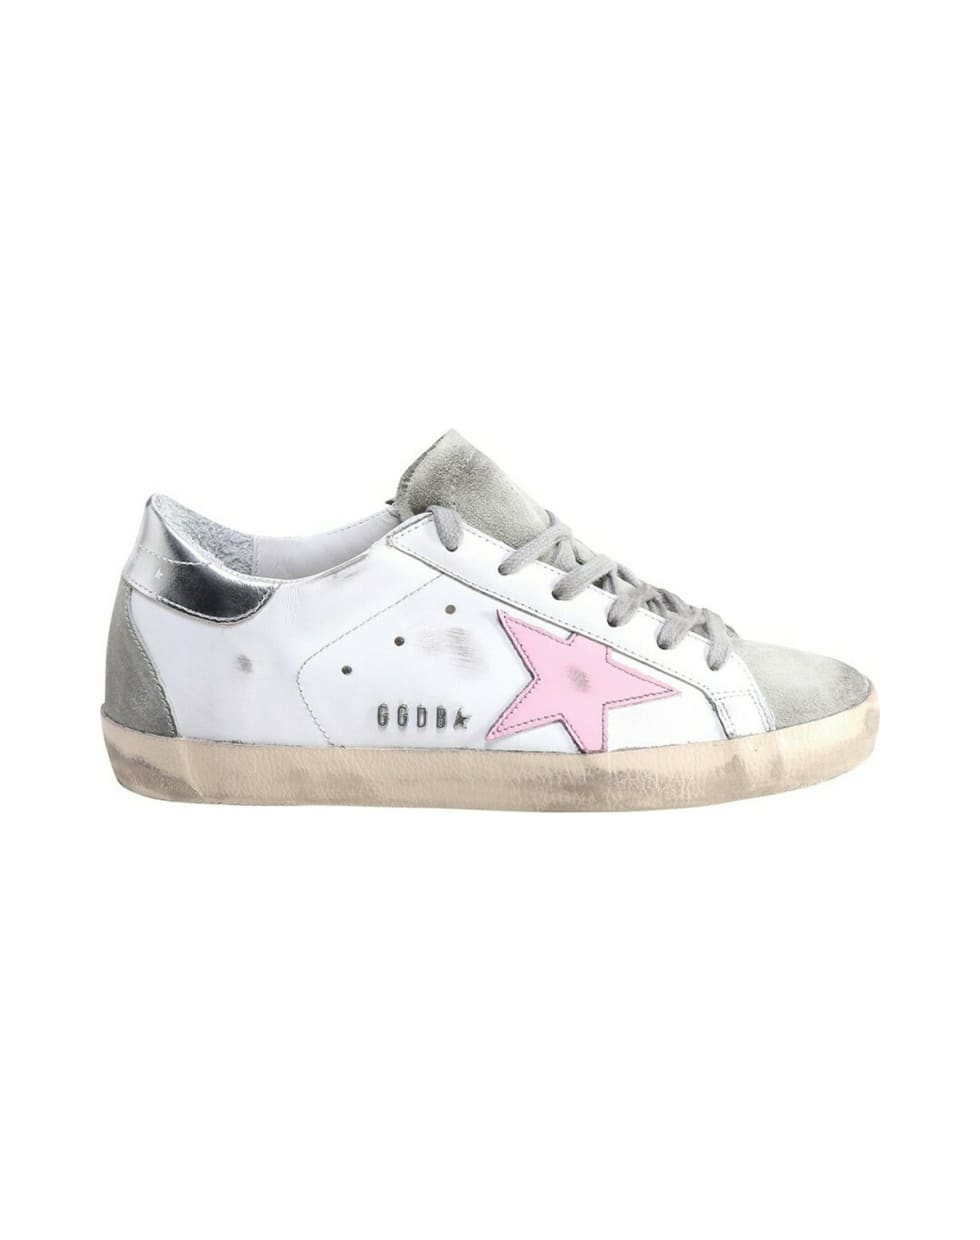 Golden Goose Super-star Leather Upper And Star Suede Toe And Spur Laminated Heel Metal Lettering - White Ice Orchidp Ink Silver